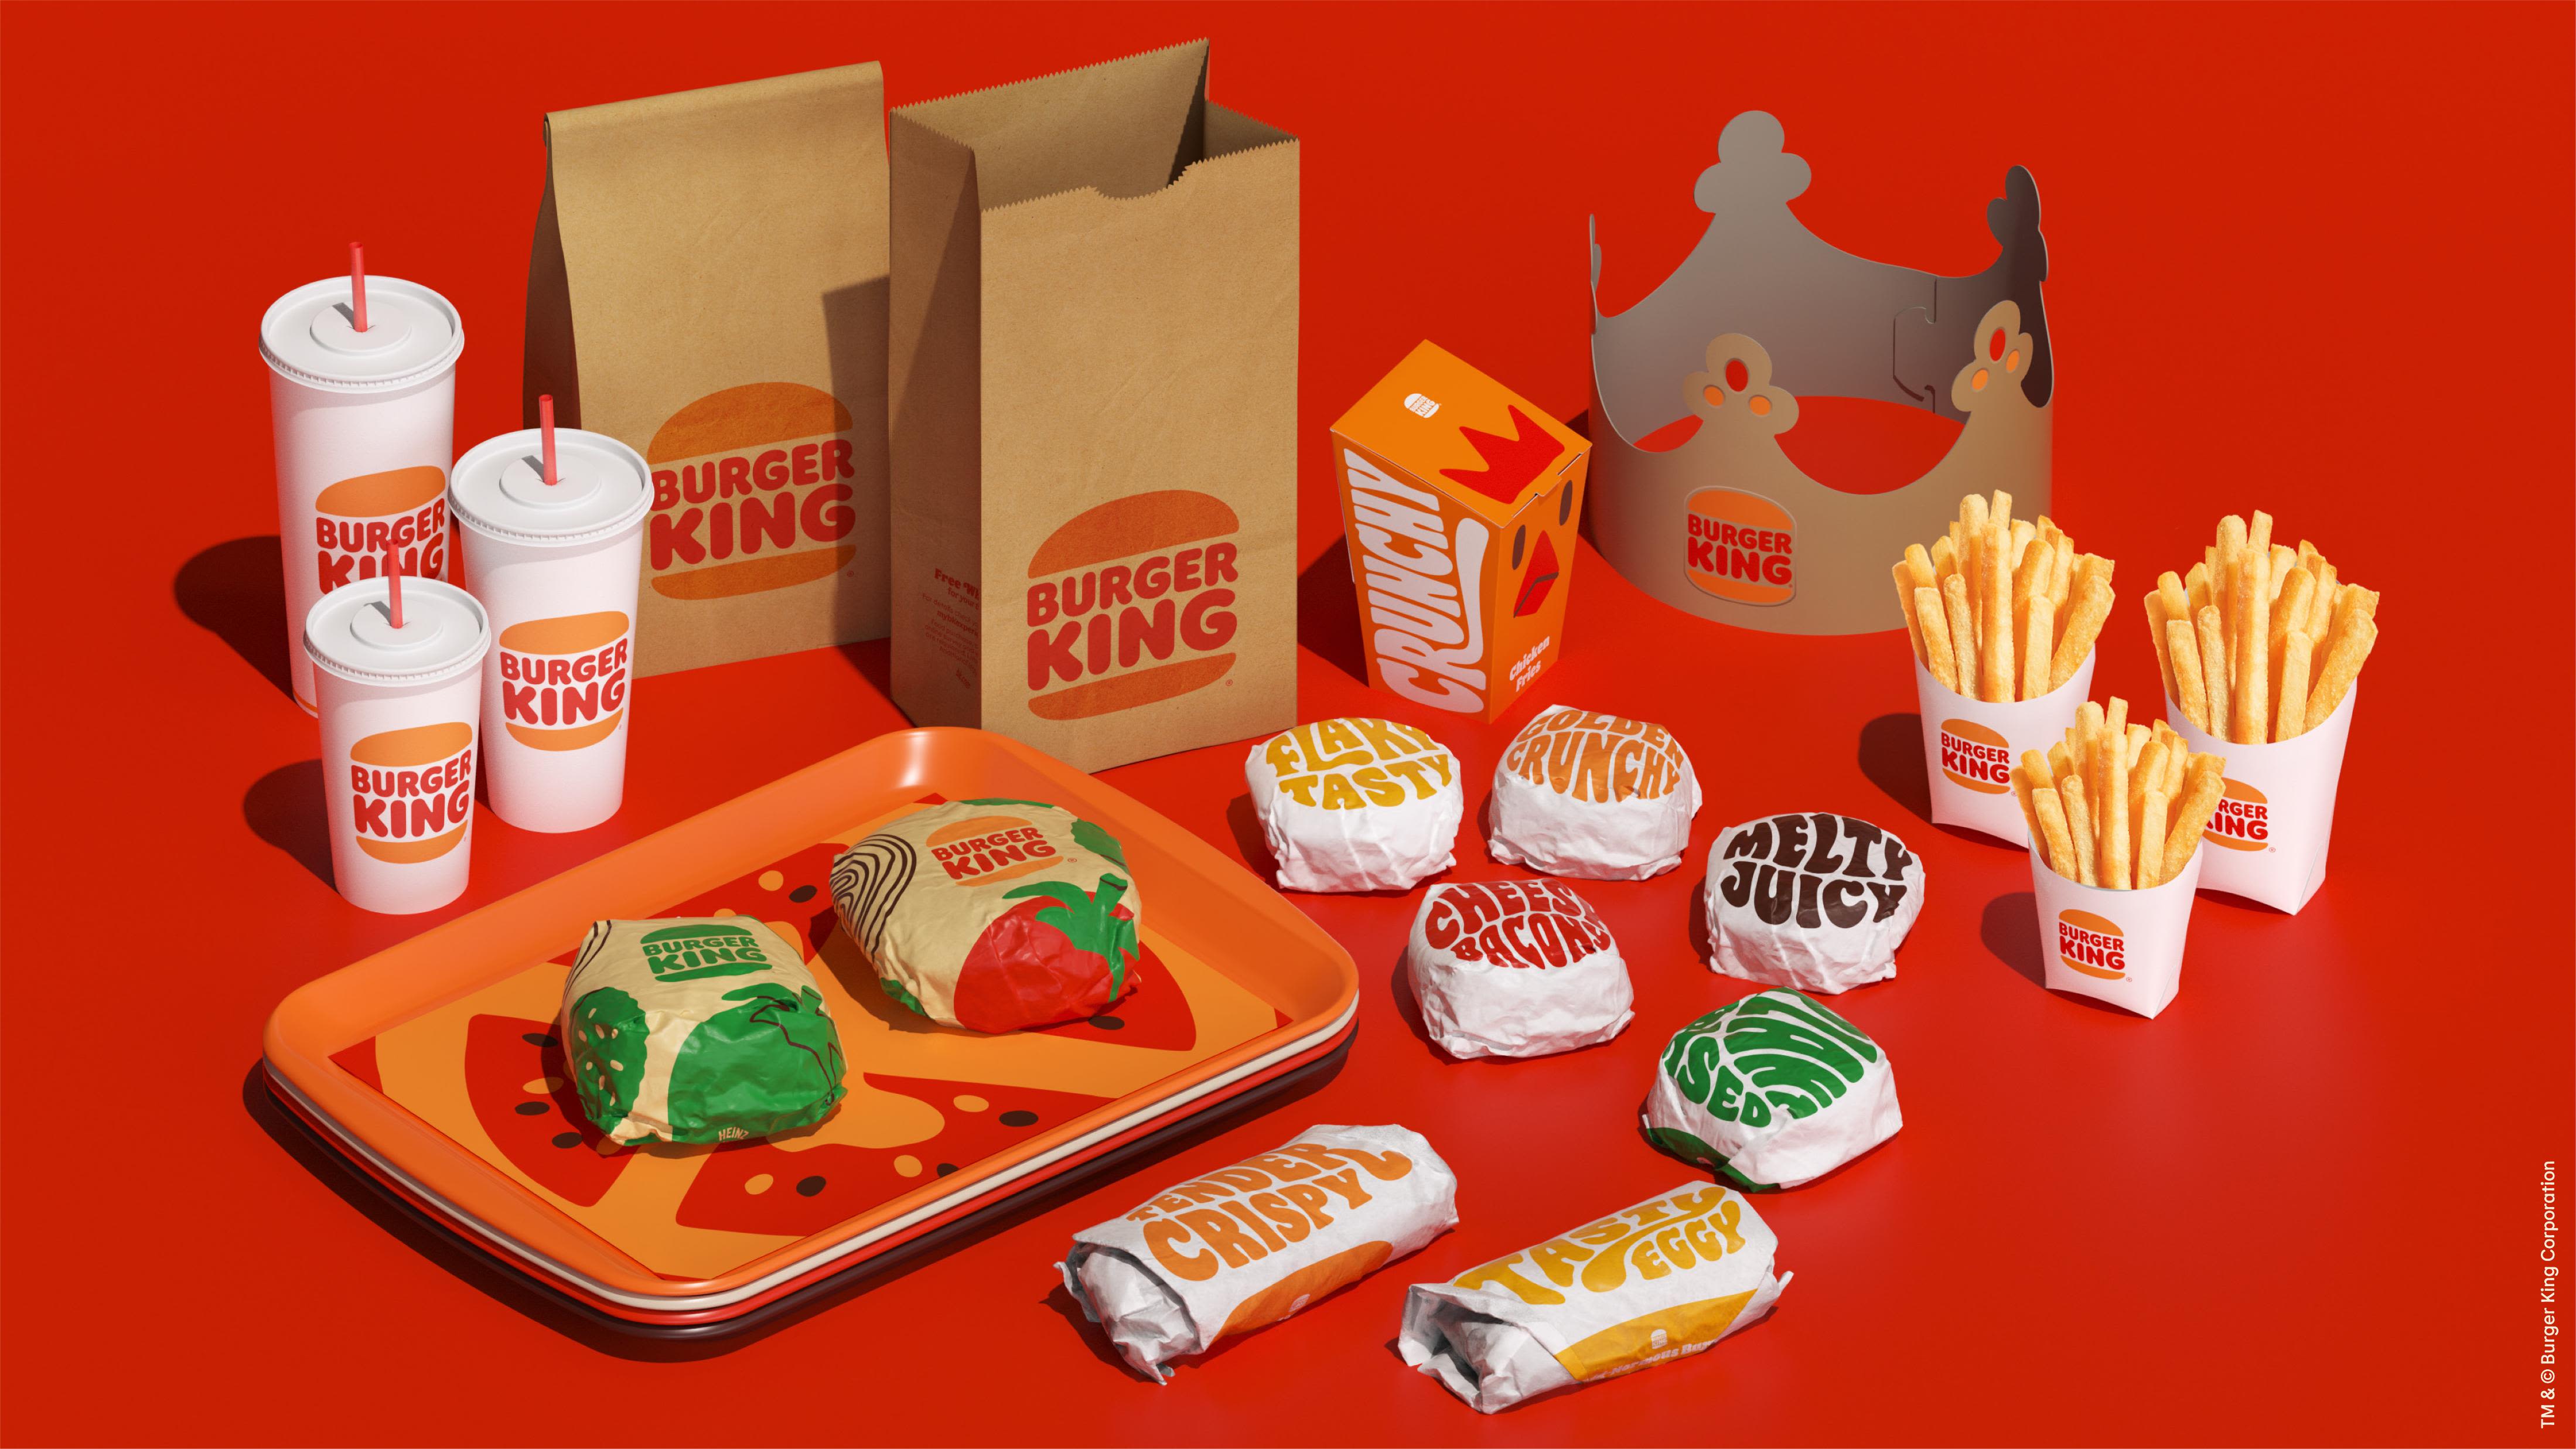 What Are Some Popular Design Trends For Burger Boxes?